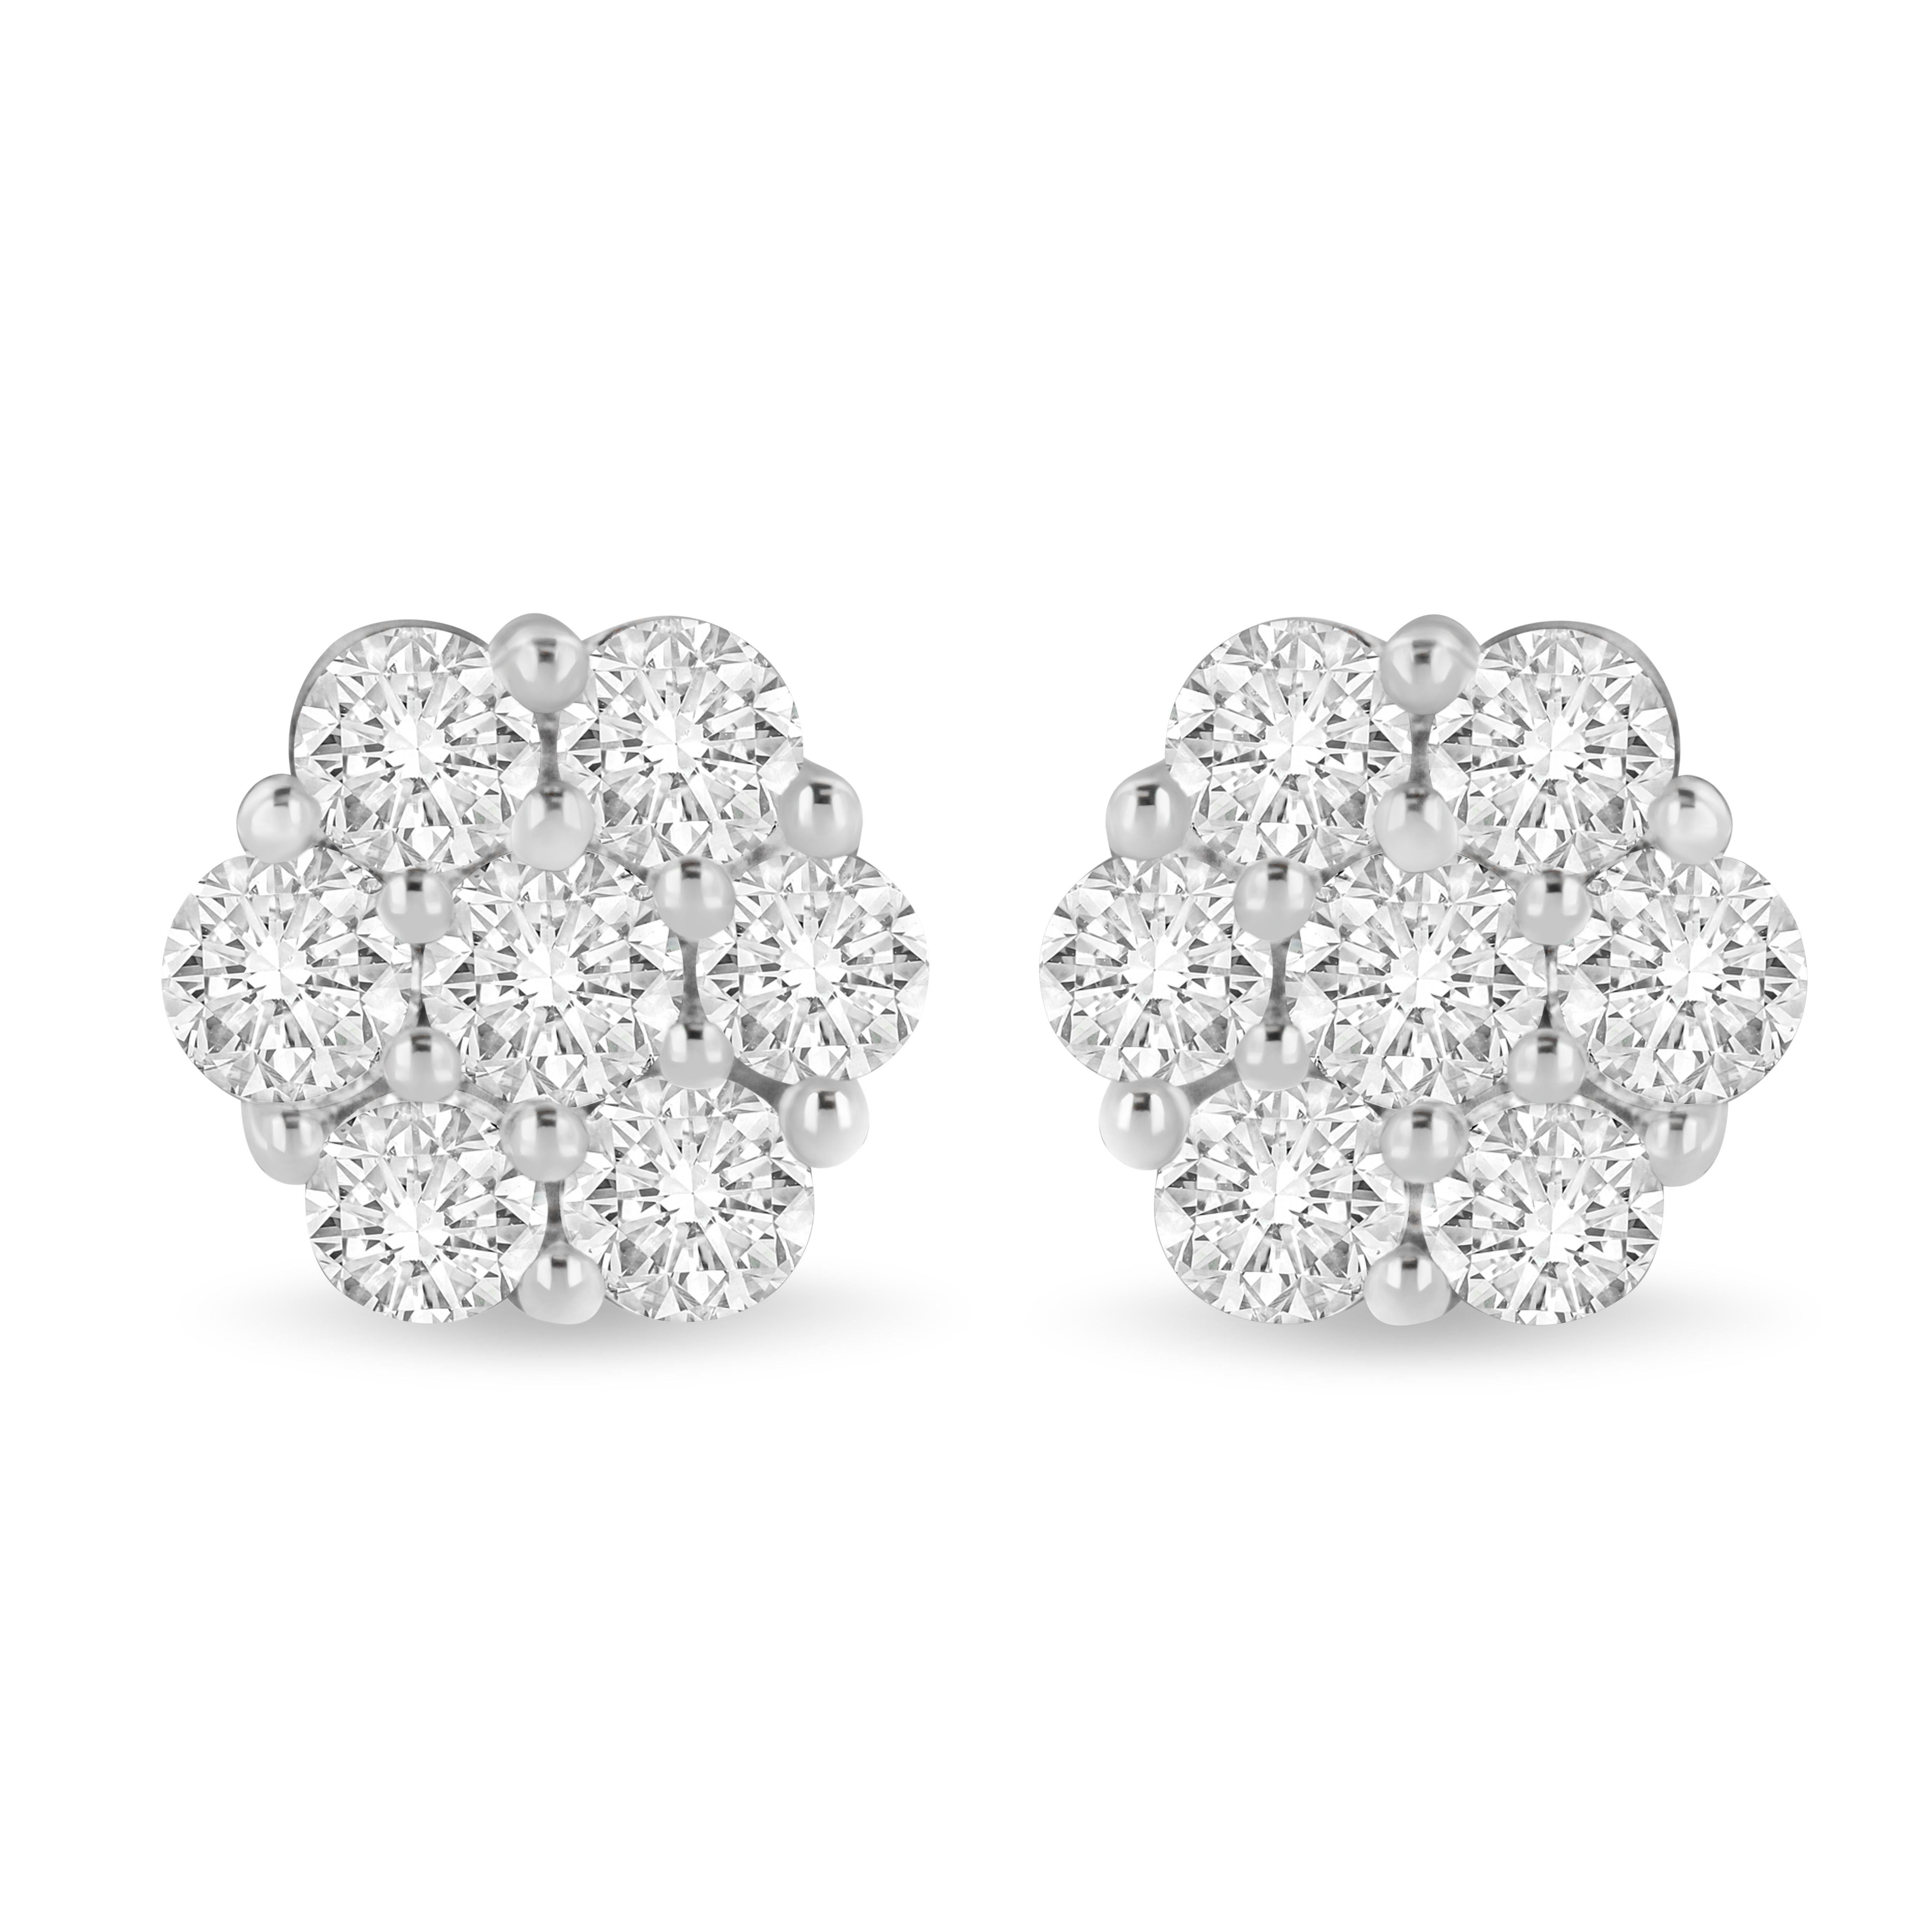 These gorgeous floral cluster studs are made with 7 natural, round-cut diamonds each. Designed in the finest 14k white gold, these earrings boast an impressive total diamond weight of 3 ct. This piece is the perfect accessory for any formal night